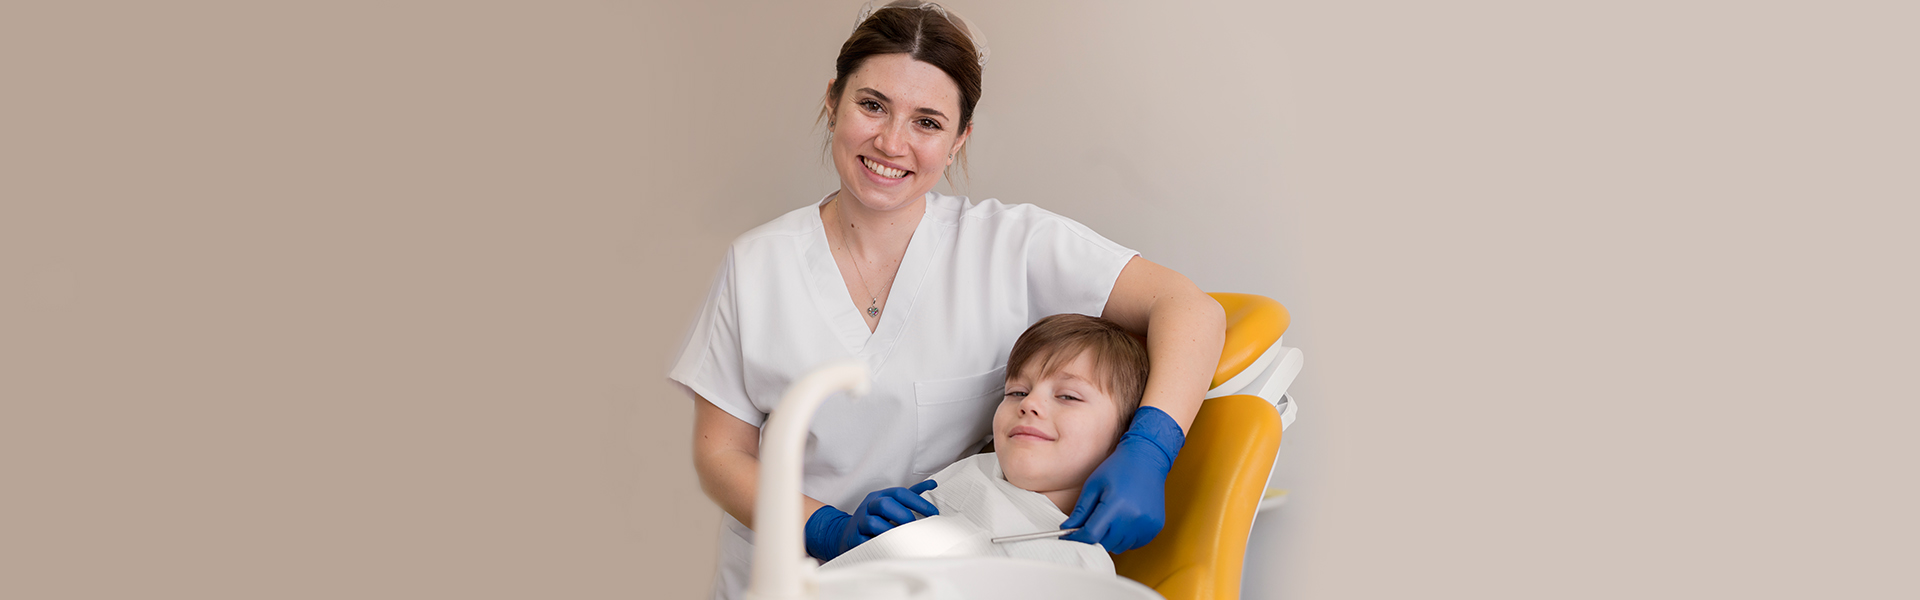 4 Steps for Easing your Kids’ Fear of the Dentist